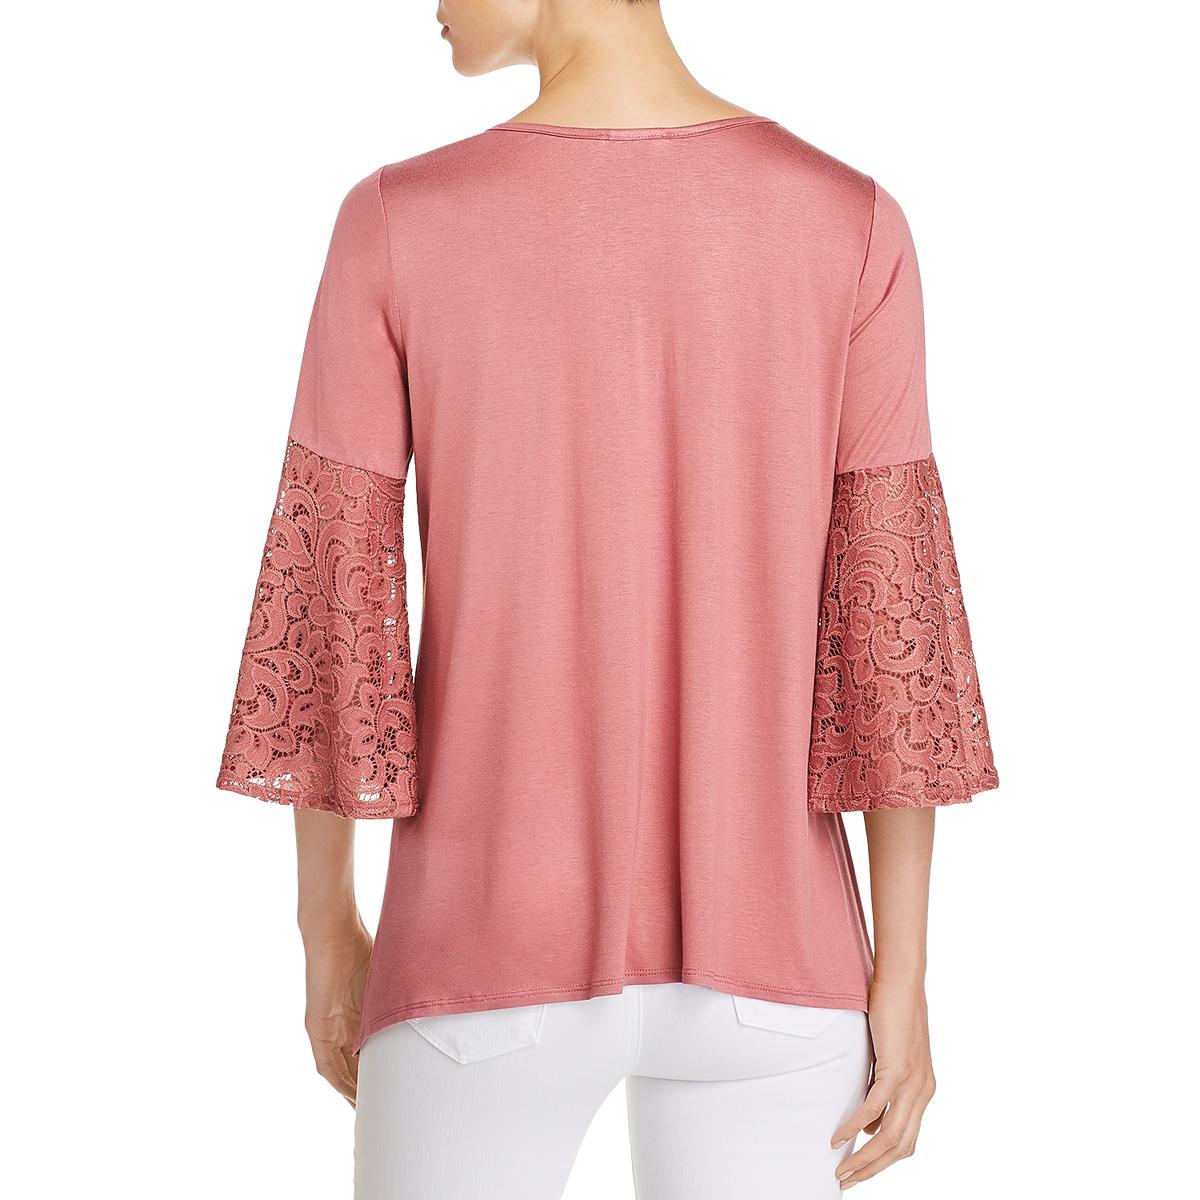 Status by Chenault Womens Jersey Lace Bell Sleeve Blouse Top BHFO 4016 ...